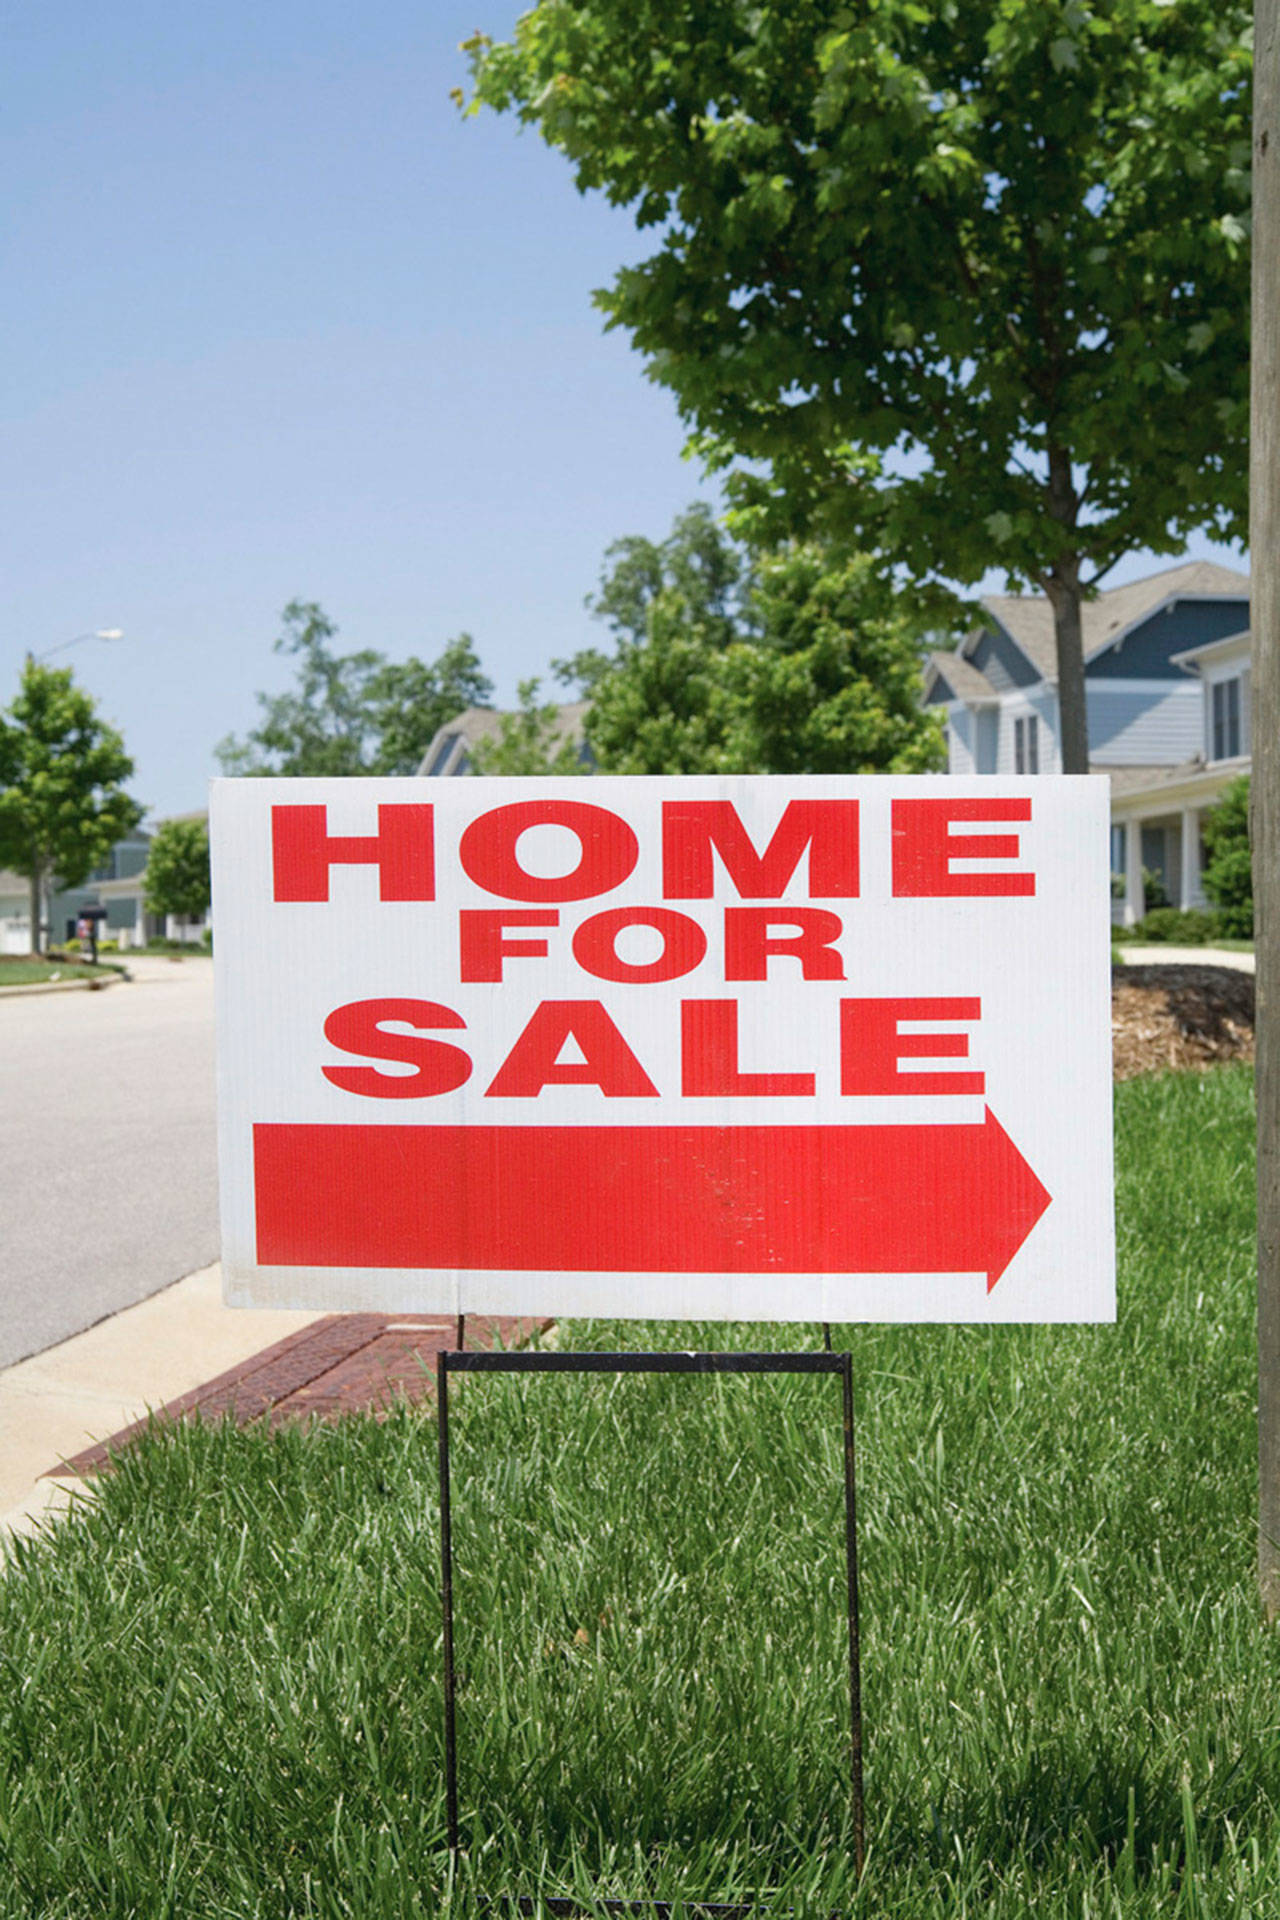 Summer doldrums for home sales not happening around Western Washington